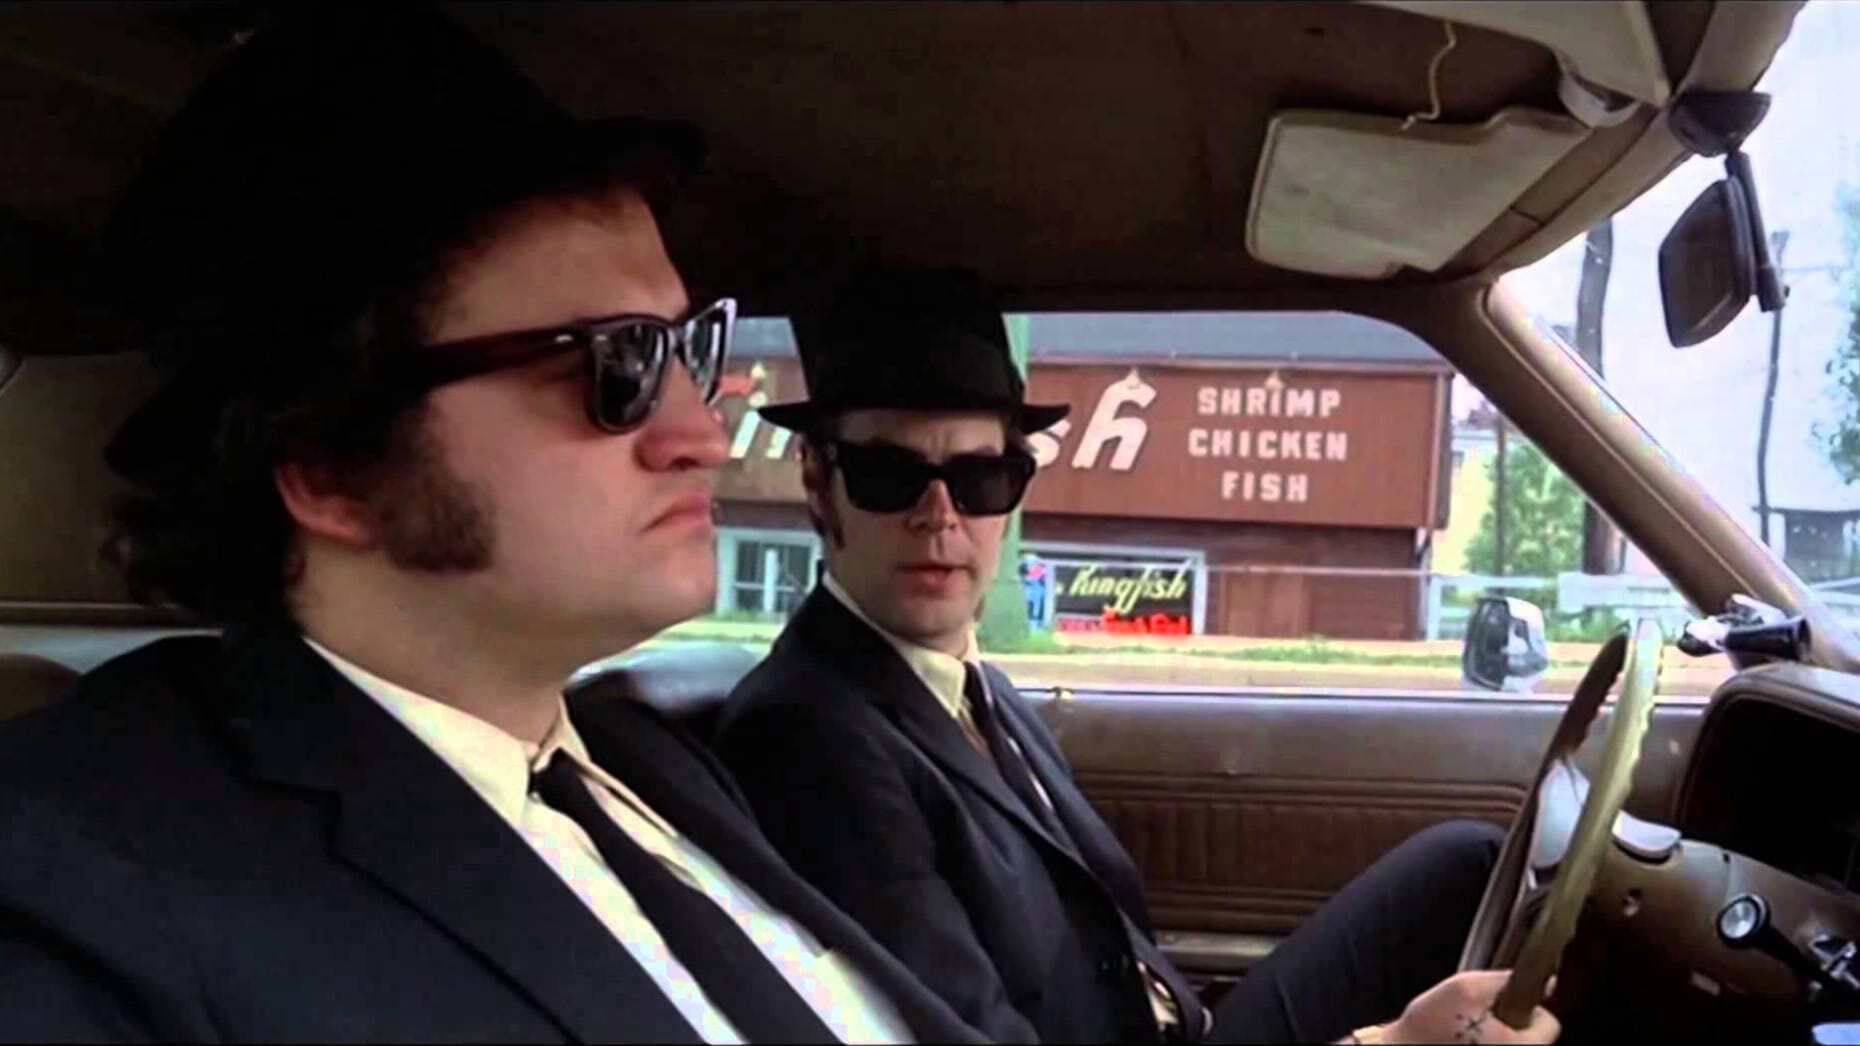 <p>Considered by many to be the <a href="https://theplaylist.net/blues-brothers-saturday-night-live-movie-20200619/">greatest <em>Saturday Night Live</em> spinoff film</a> of all time, <a href="https://www.imdb.com/title/tt0080455/"><em>The Blues Brothers</em></a> stars John Belushi and Dan Aykroyd road-tripping around the state looking to get their old band back together. The movie was a box-office and cult hit, eventually spawning a <a href="https://www.imdb.com/title/tt0118747/">sequel</a> that unfortunately failed to live up to the high bar set by the brothers.</p>